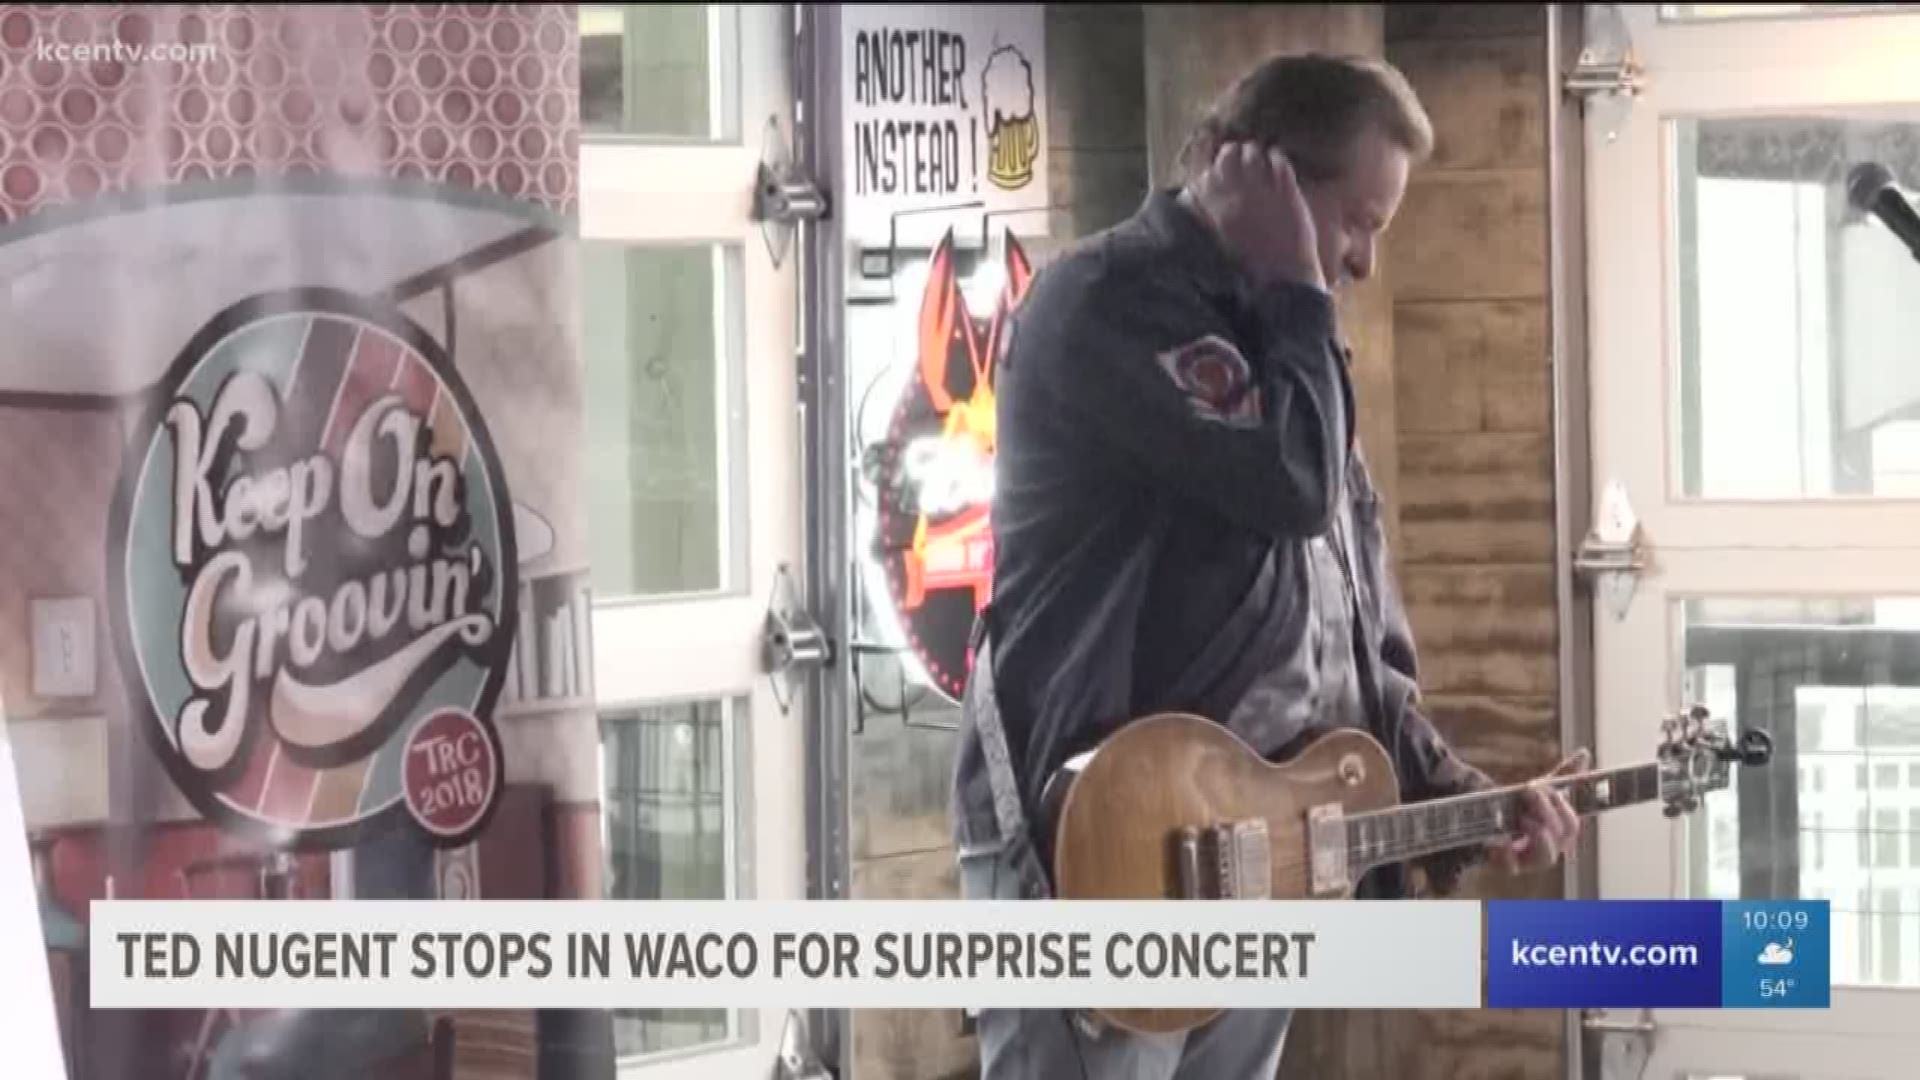 Singer Ted Nugent made a quick stop in Waco for a surprise concert at Buzzard Billy's. 